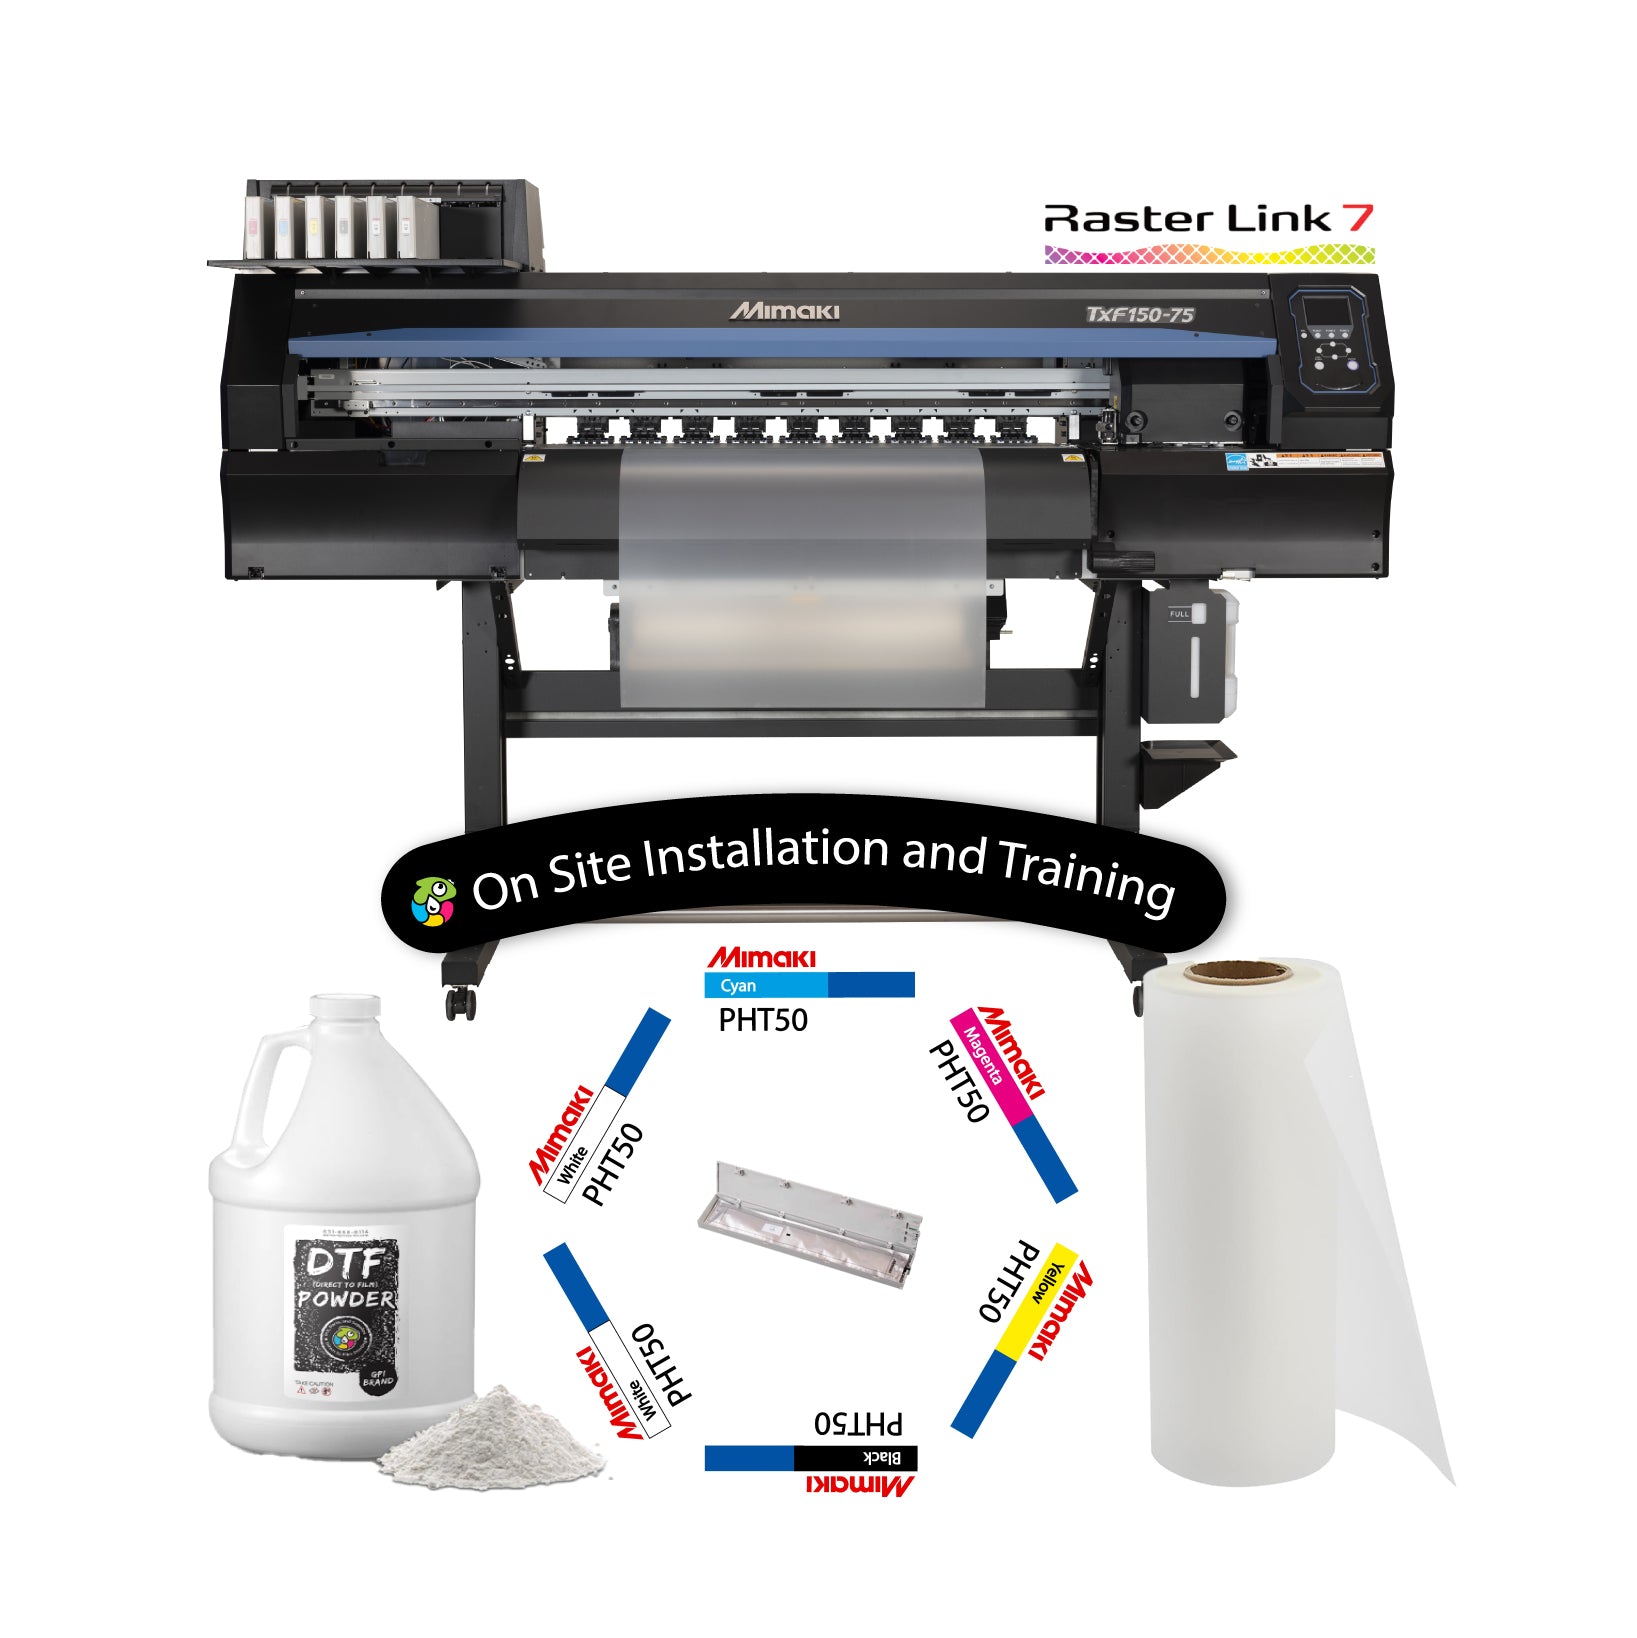 Mimaki DTF printer package with dtf powder, media, inks